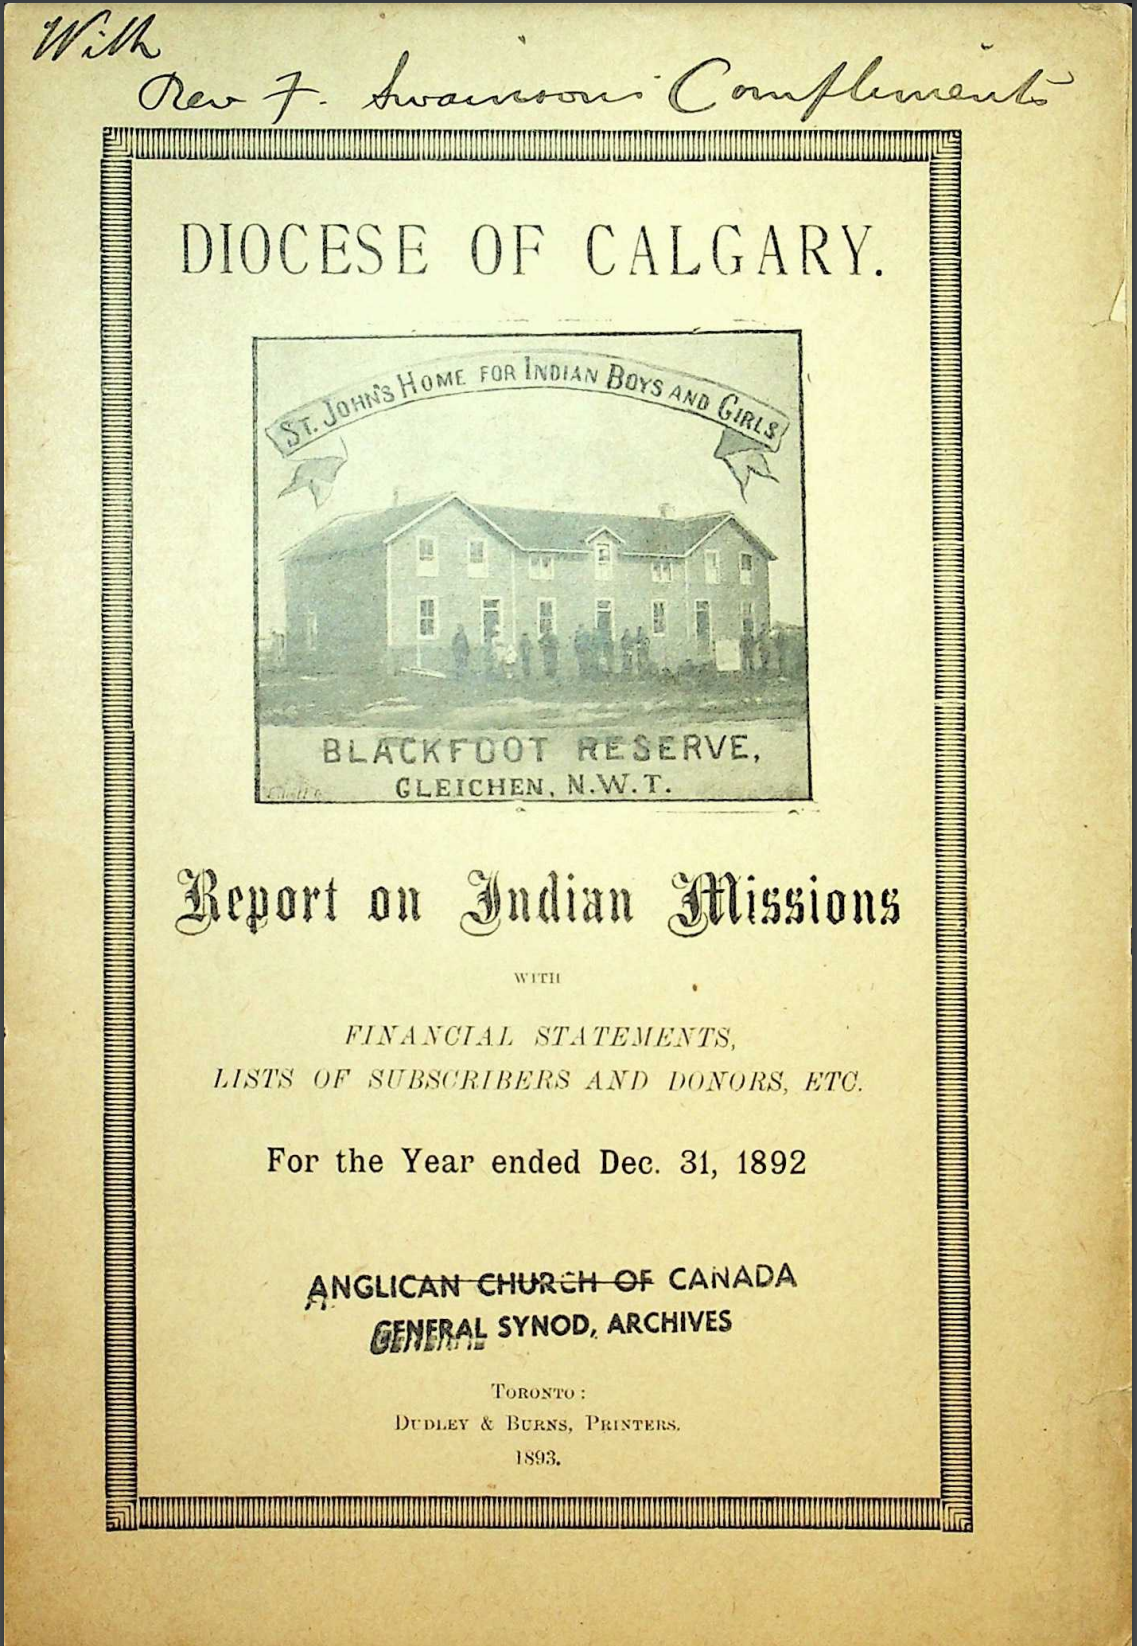 Cover of Diocese of Calgary Report on Indian Missions, 1892.